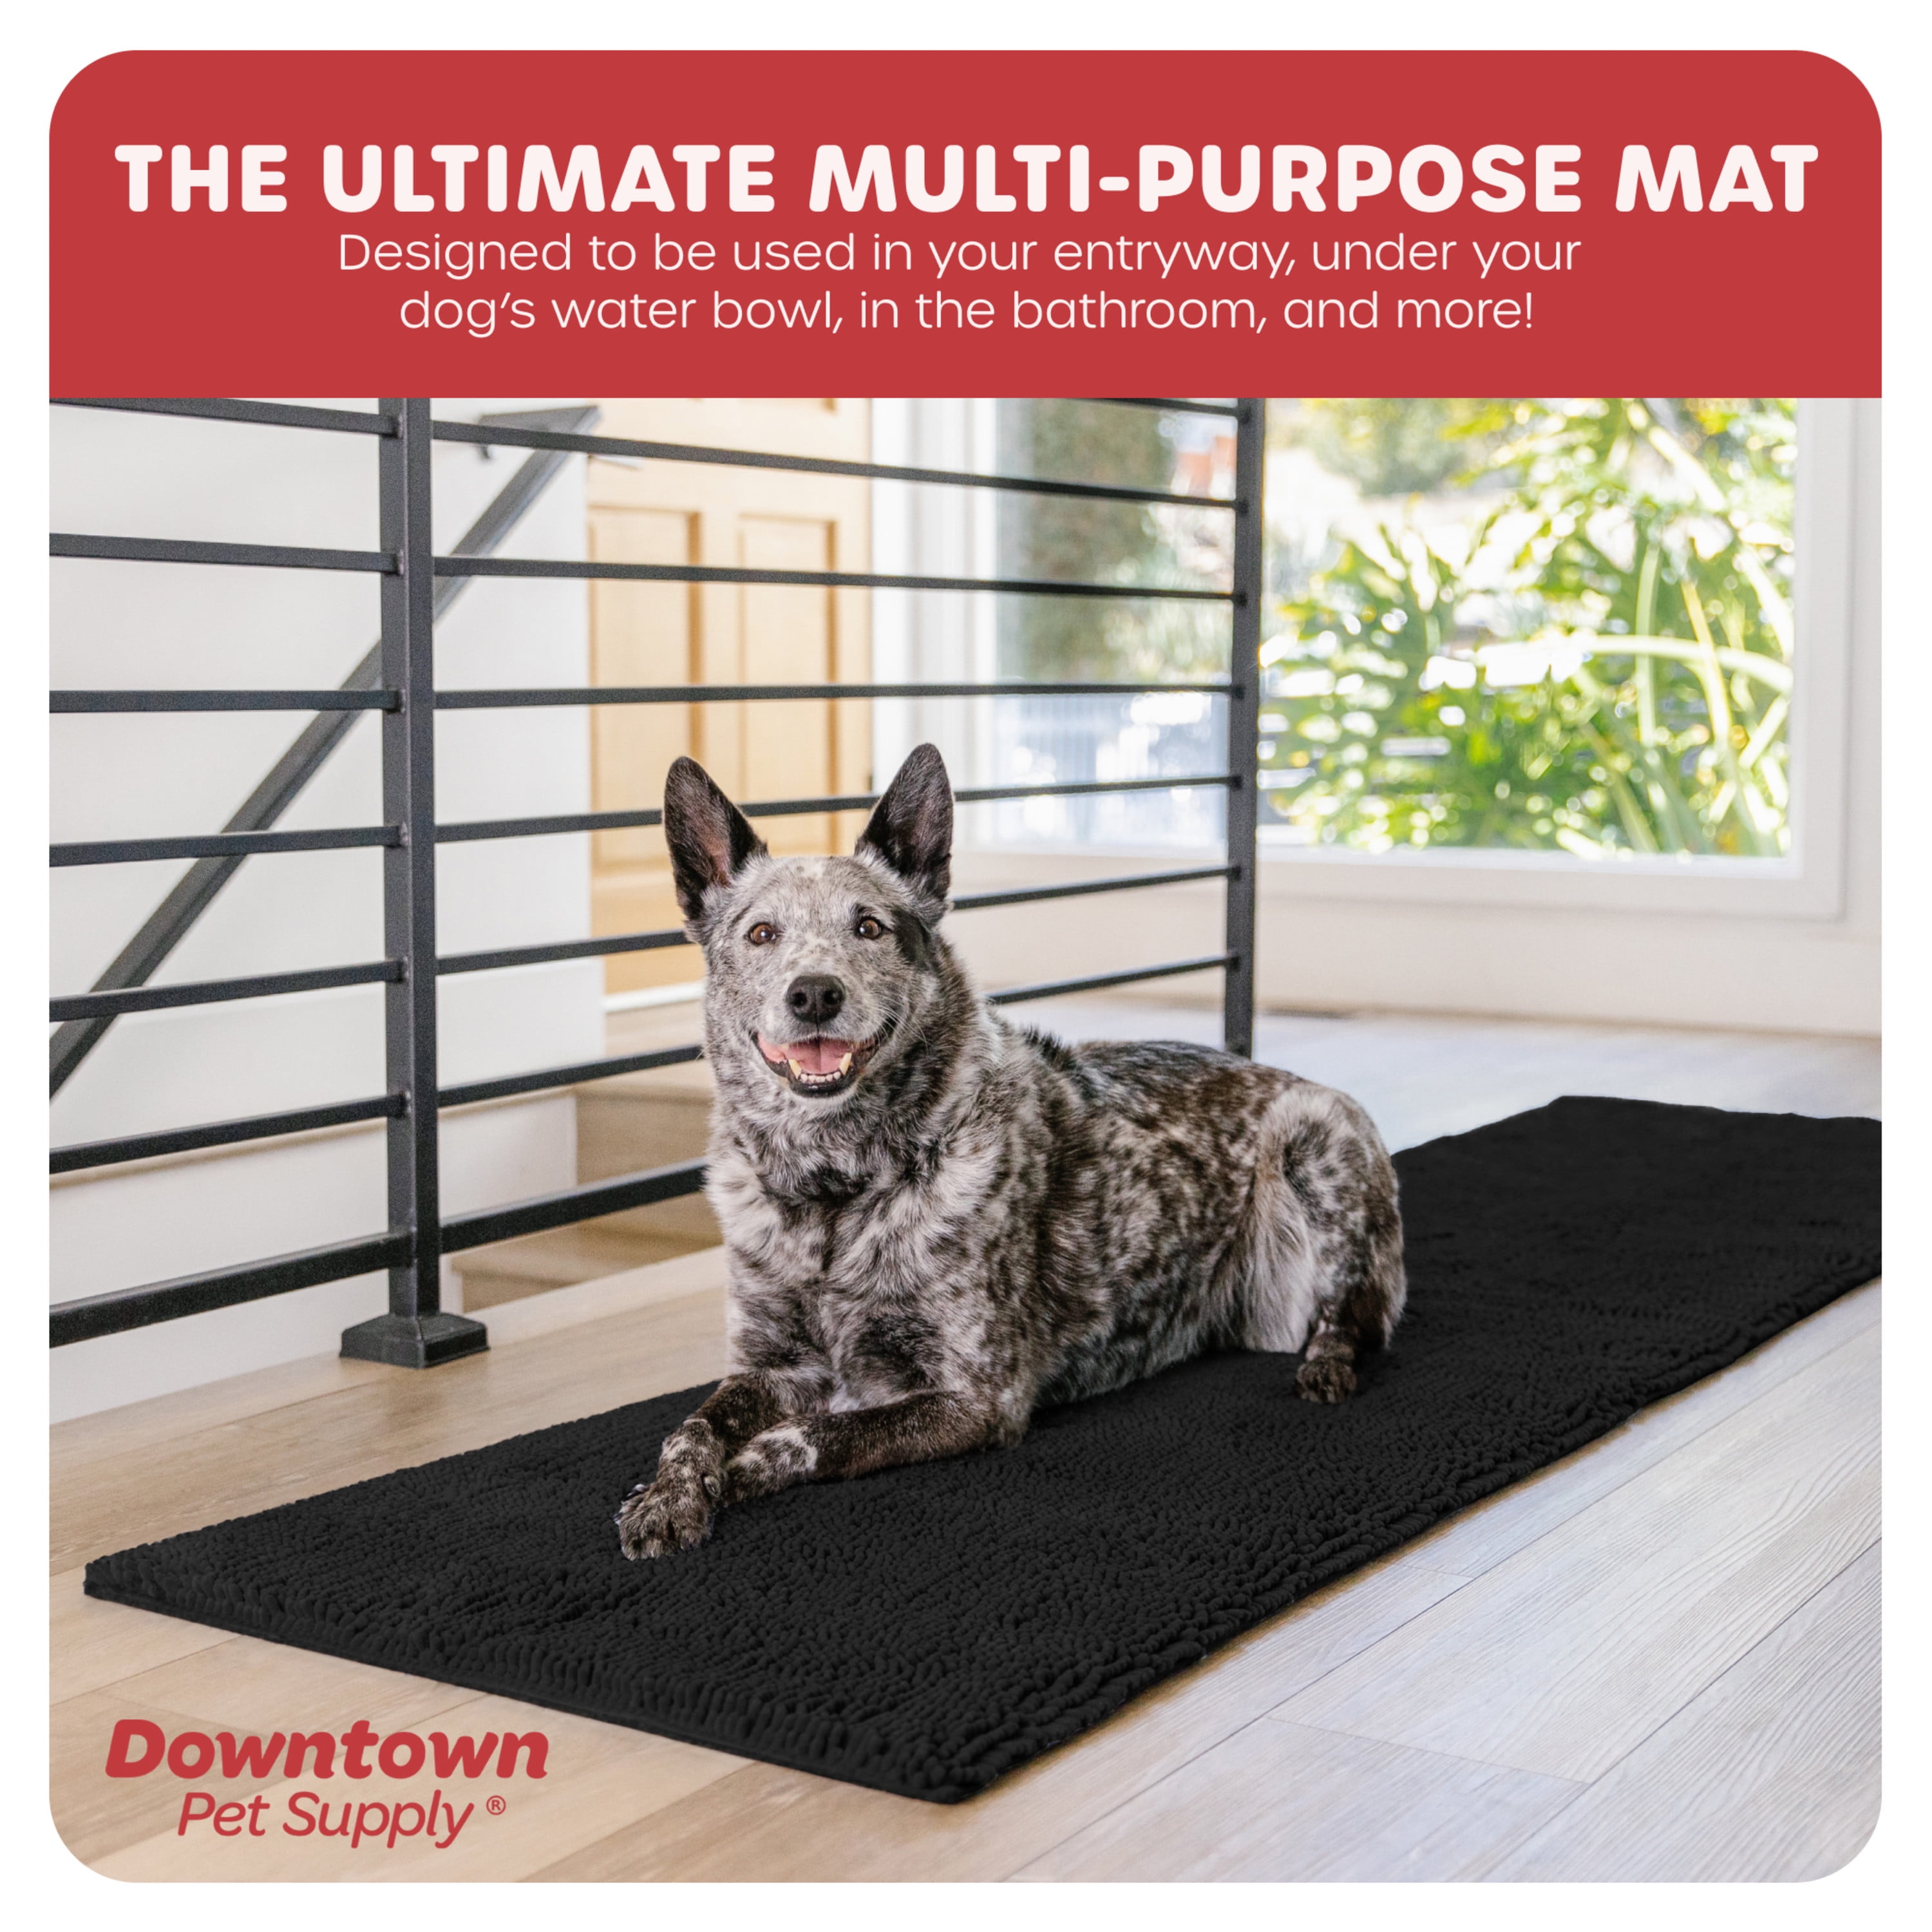 My Doggy Place Microfiber Dog Mat for Muddy Paws (36 x 26, Oatmeal)  Non-Slip Dog Door Mat, Absorbent Quick-Drying Paw Cleaning Pet Mat - Washer  and